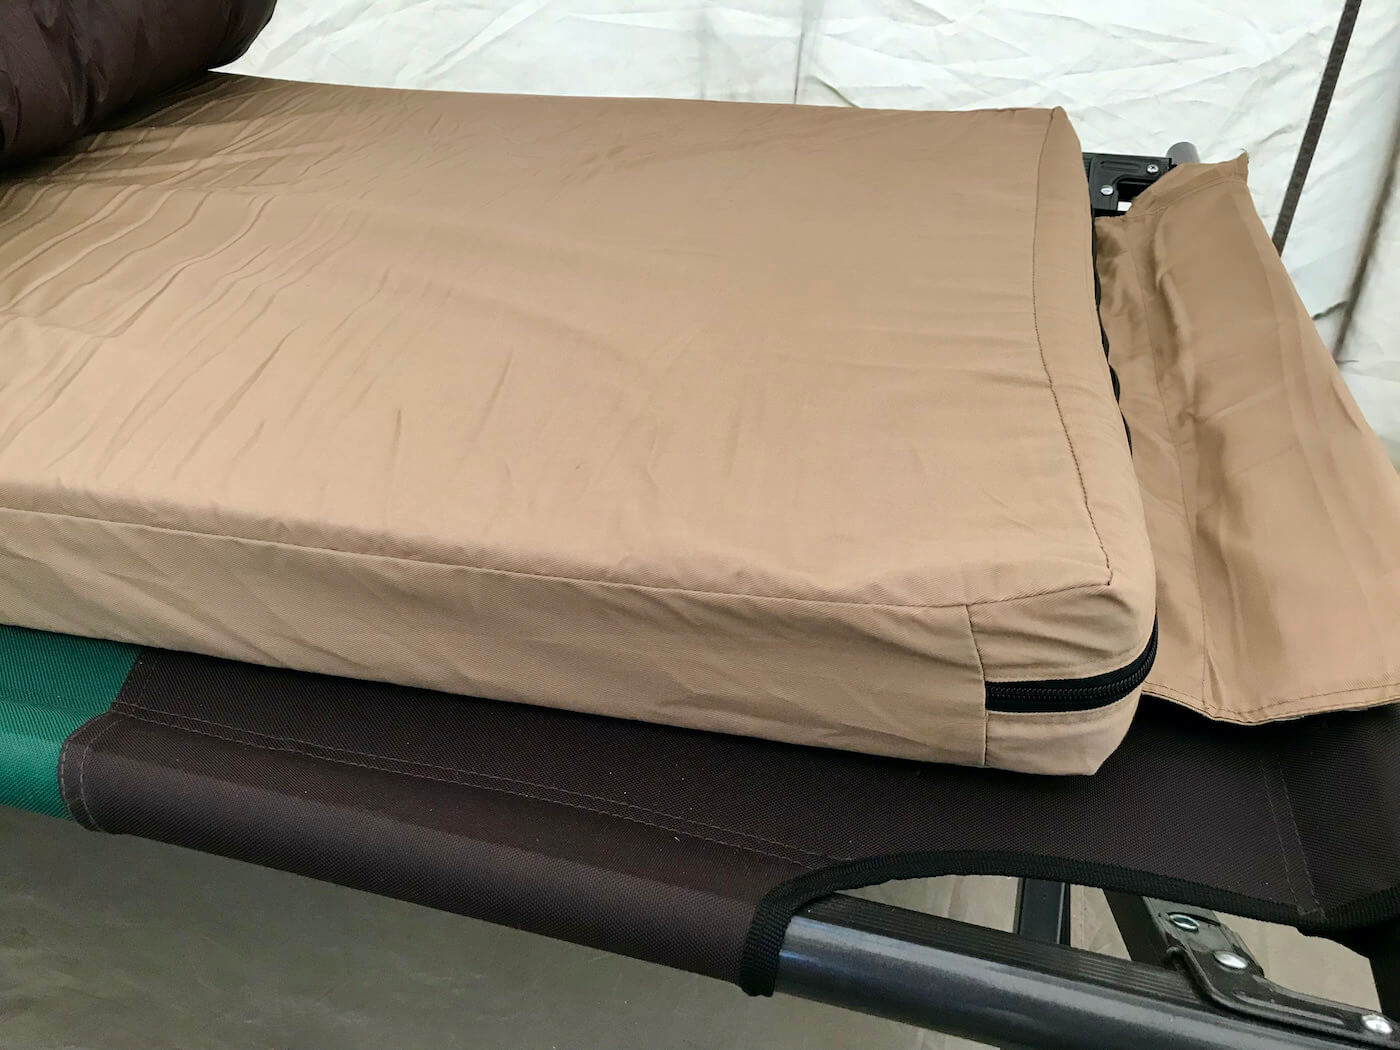 This photo shows the top of the Cabela's 3" Cot Pad that the author tested during the review process.